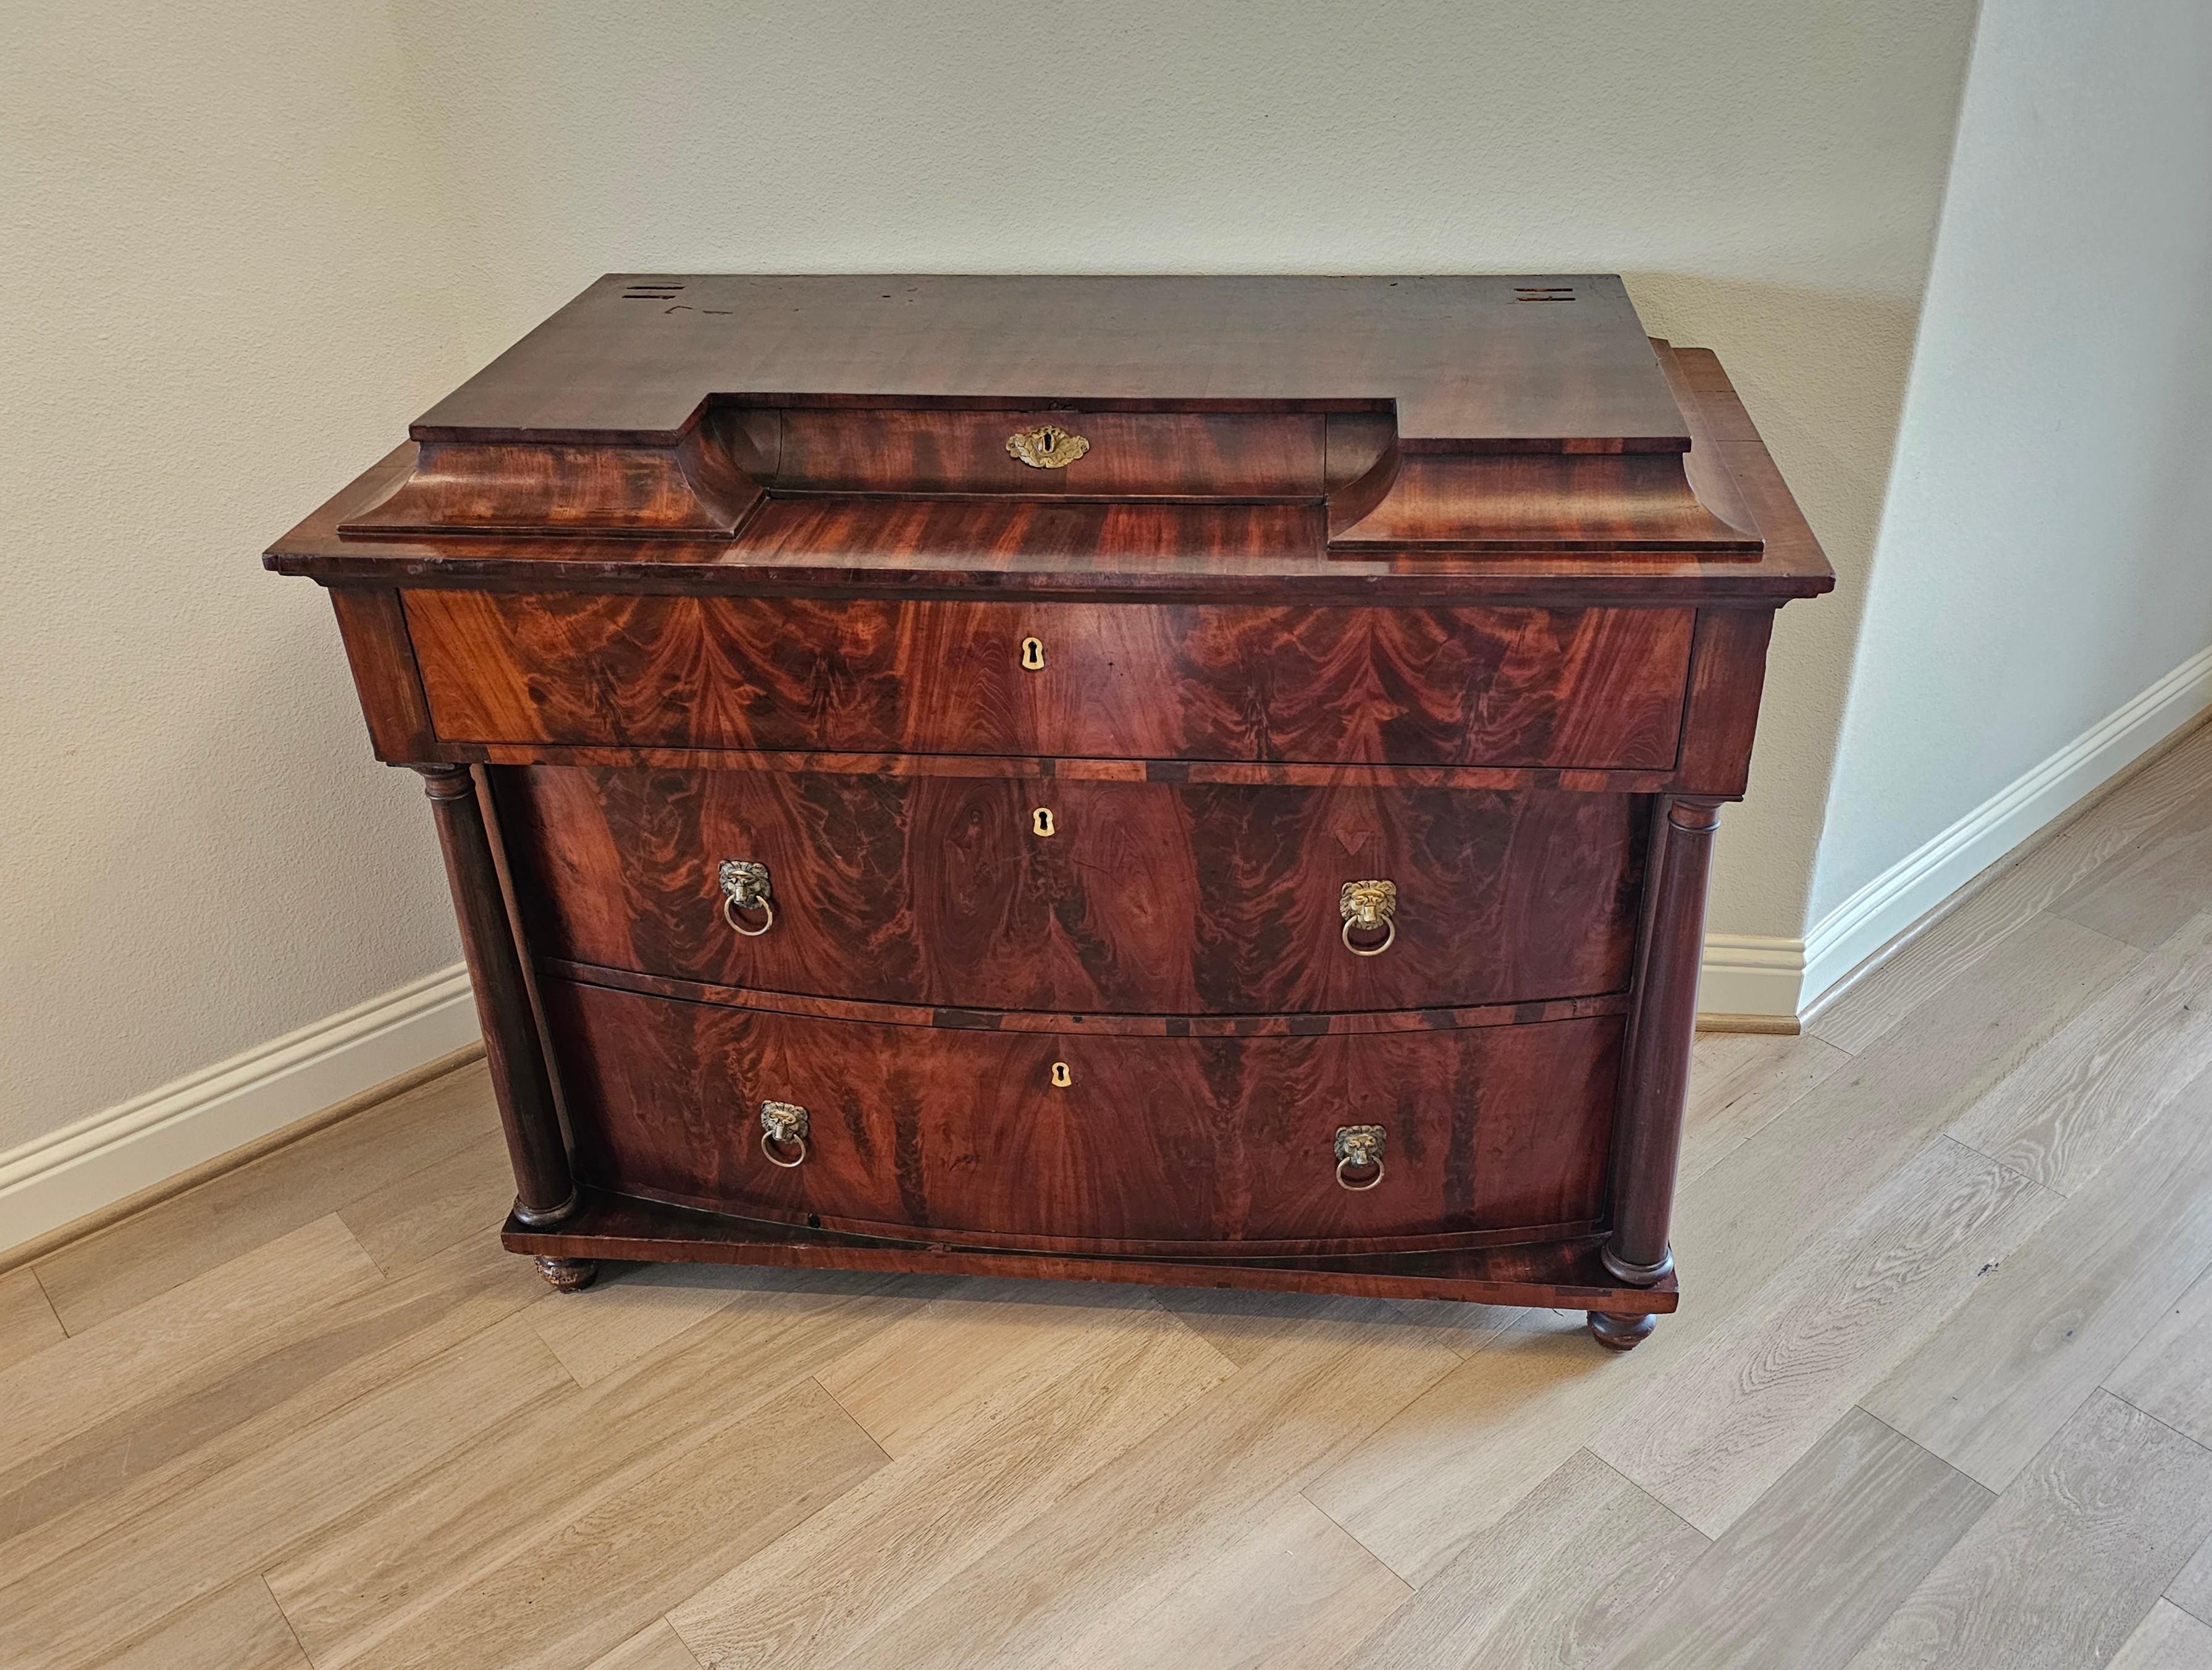 A scarce example of early Biedermeier Period (1815-1848) chest of drawers commode. circa 1820

Finely hand-crafted in the Baltic Region of Northern Europe in the early 19th century, heavily influenced by Napoleon’s Neoclassical inspired Empire